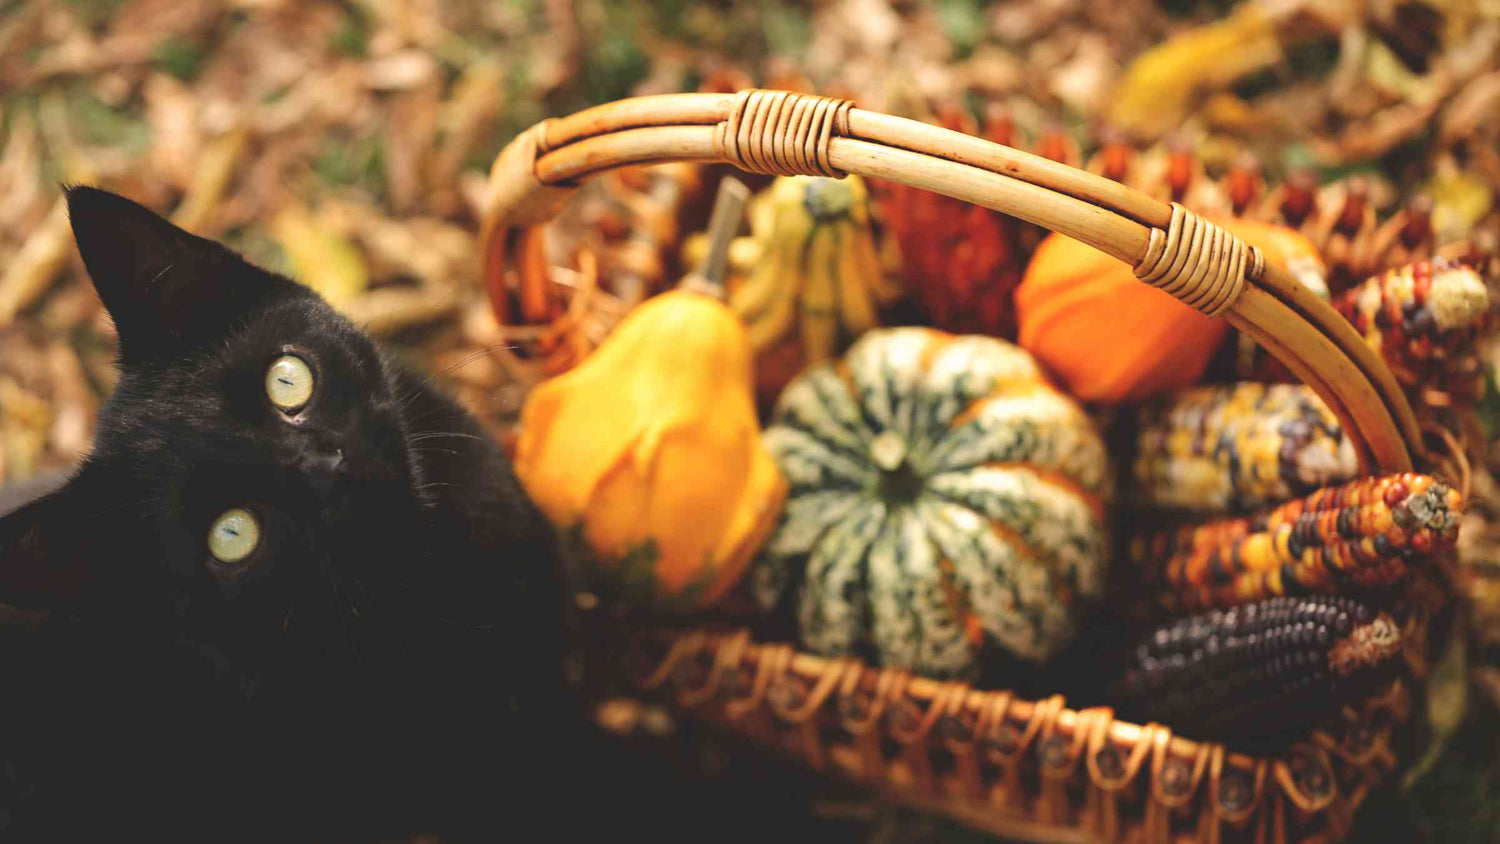 How to Prepare Your Cat for the Holidays - Black cat sitting by a festive fall basket